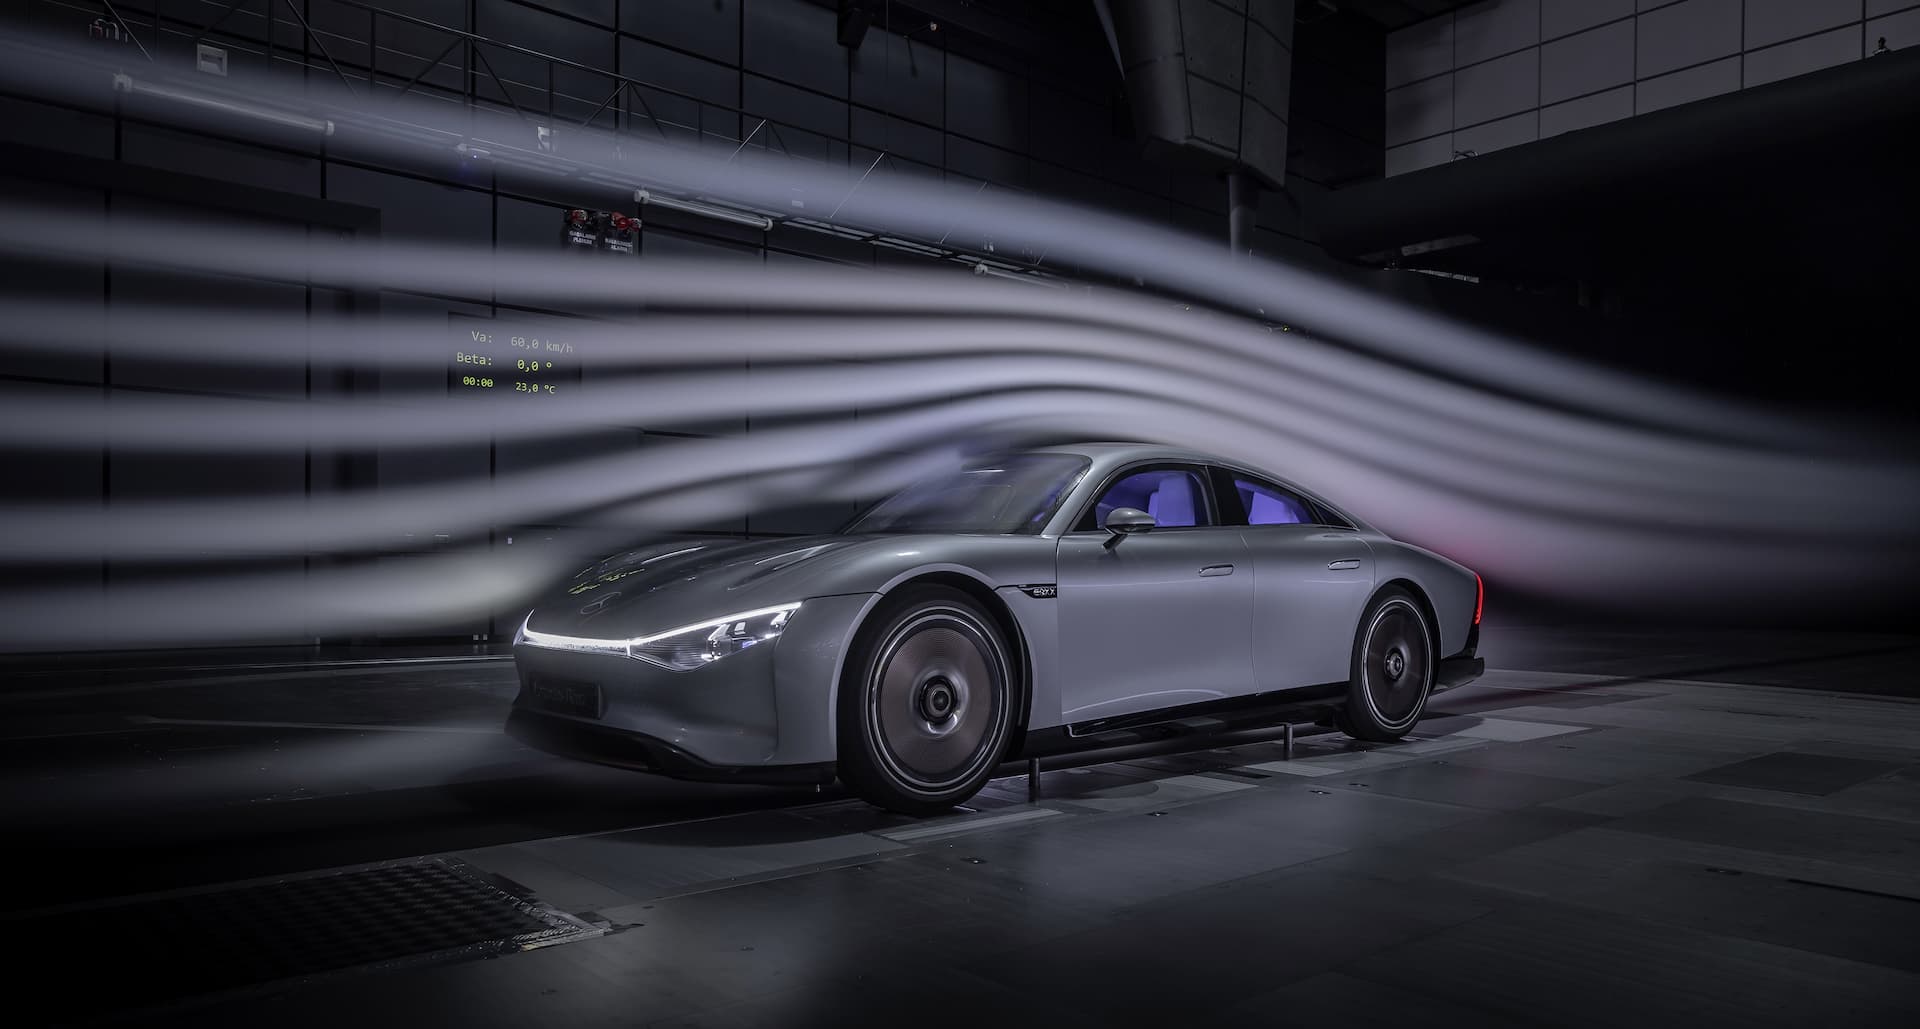 Mercedes-Benz EQXX concept in wind tunnel testing